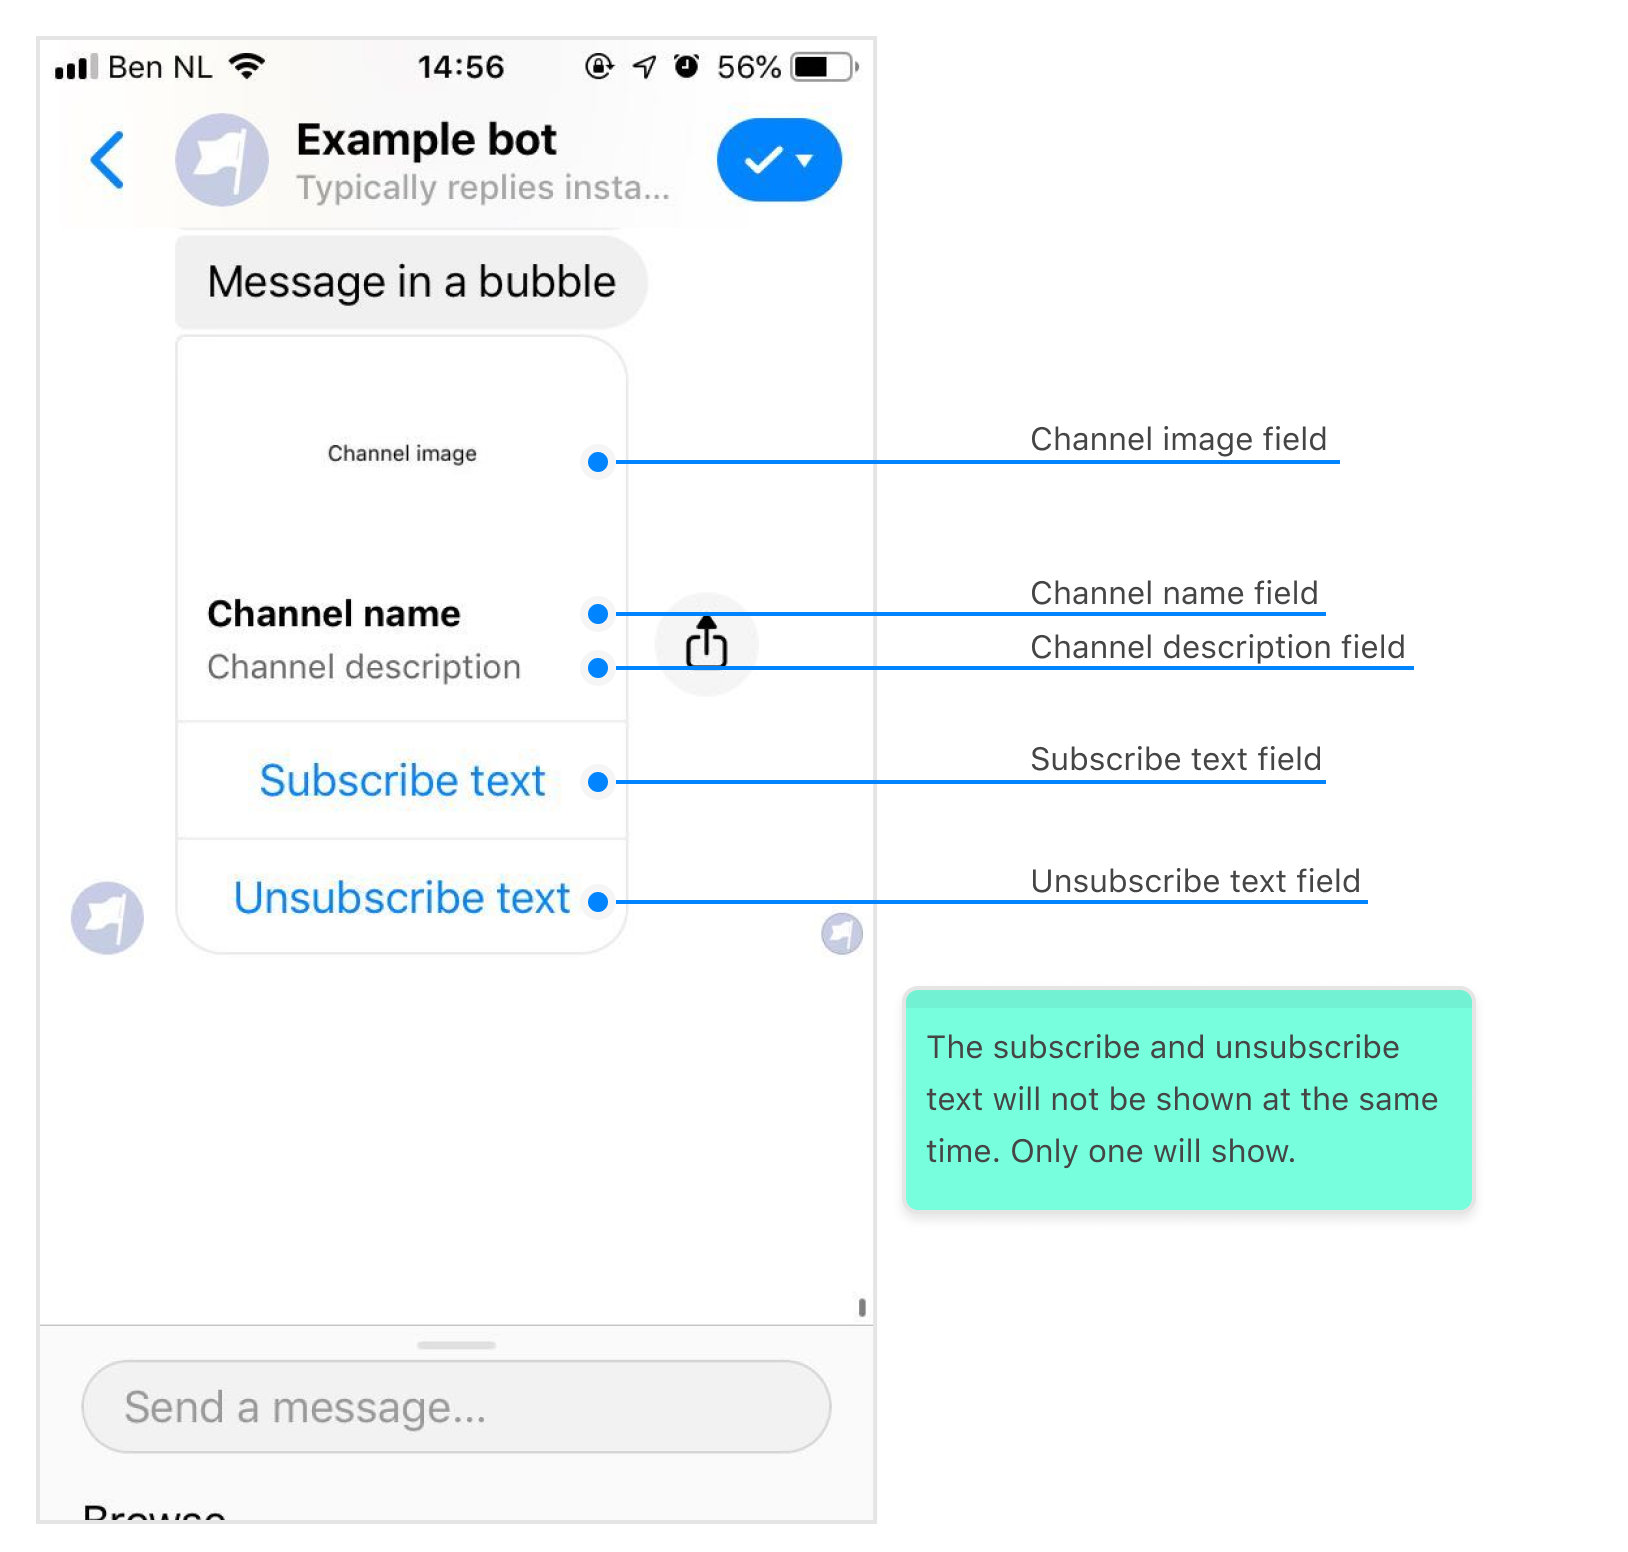 How channels will be shown in Messenger